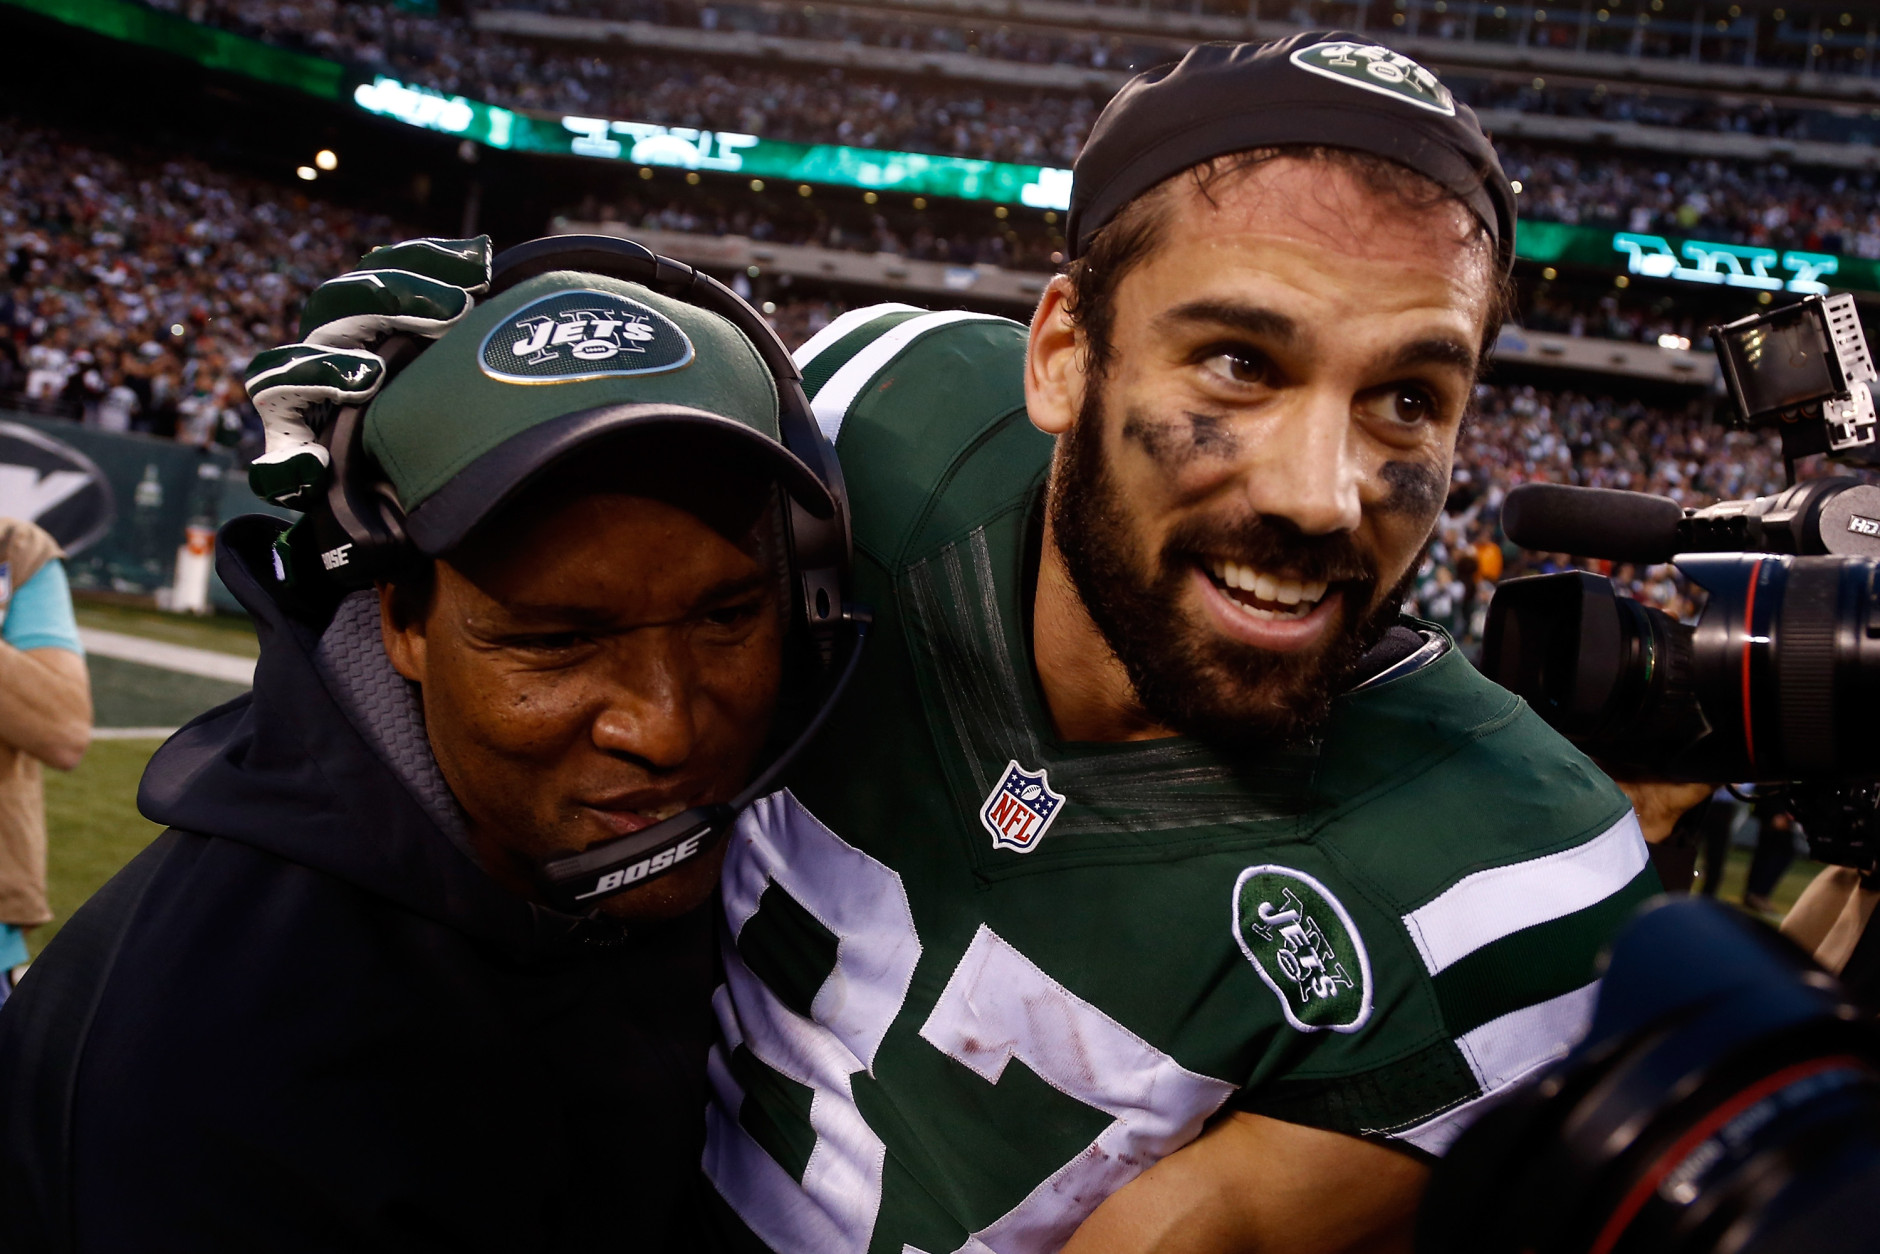 EAST RUTHERFORD, NJ - DECEMBER 27:  Eric Decker #87 of the New York Jets celebrates after defeating the New England Patriots in overtime of their game at MetLife Stadium on December 27, 2015 in East Rutherford, New Jersey.  The Jets defeated the Patriots with a score of 26 to 20 in overtime.  (Photo by Jeff Zelevansky/Getty Images)